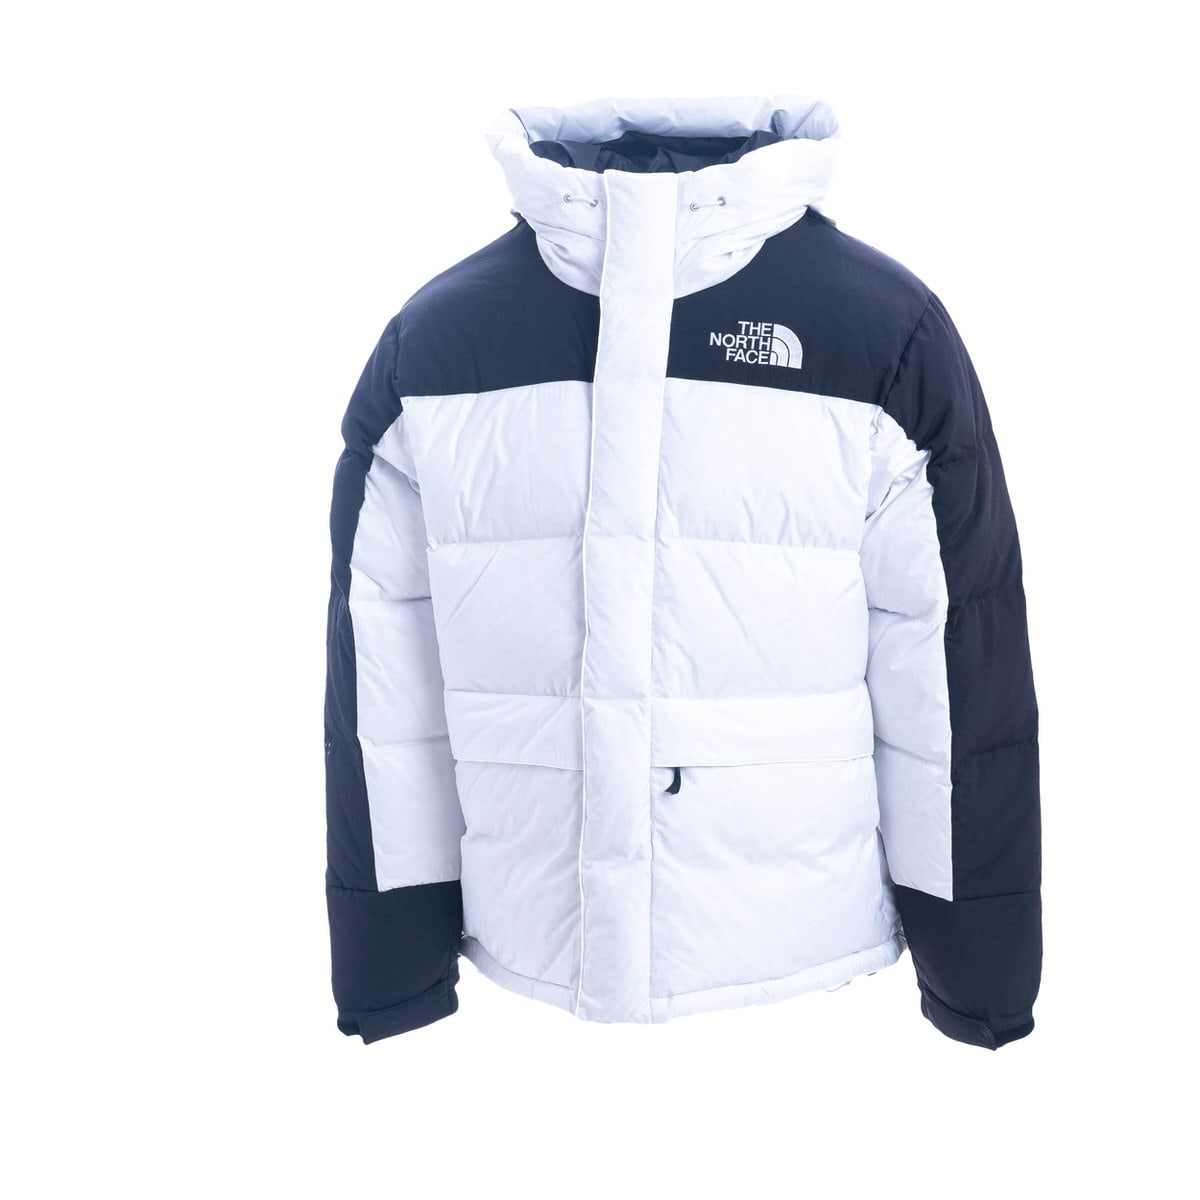 The North Face The North Face himalayan Down Jacket